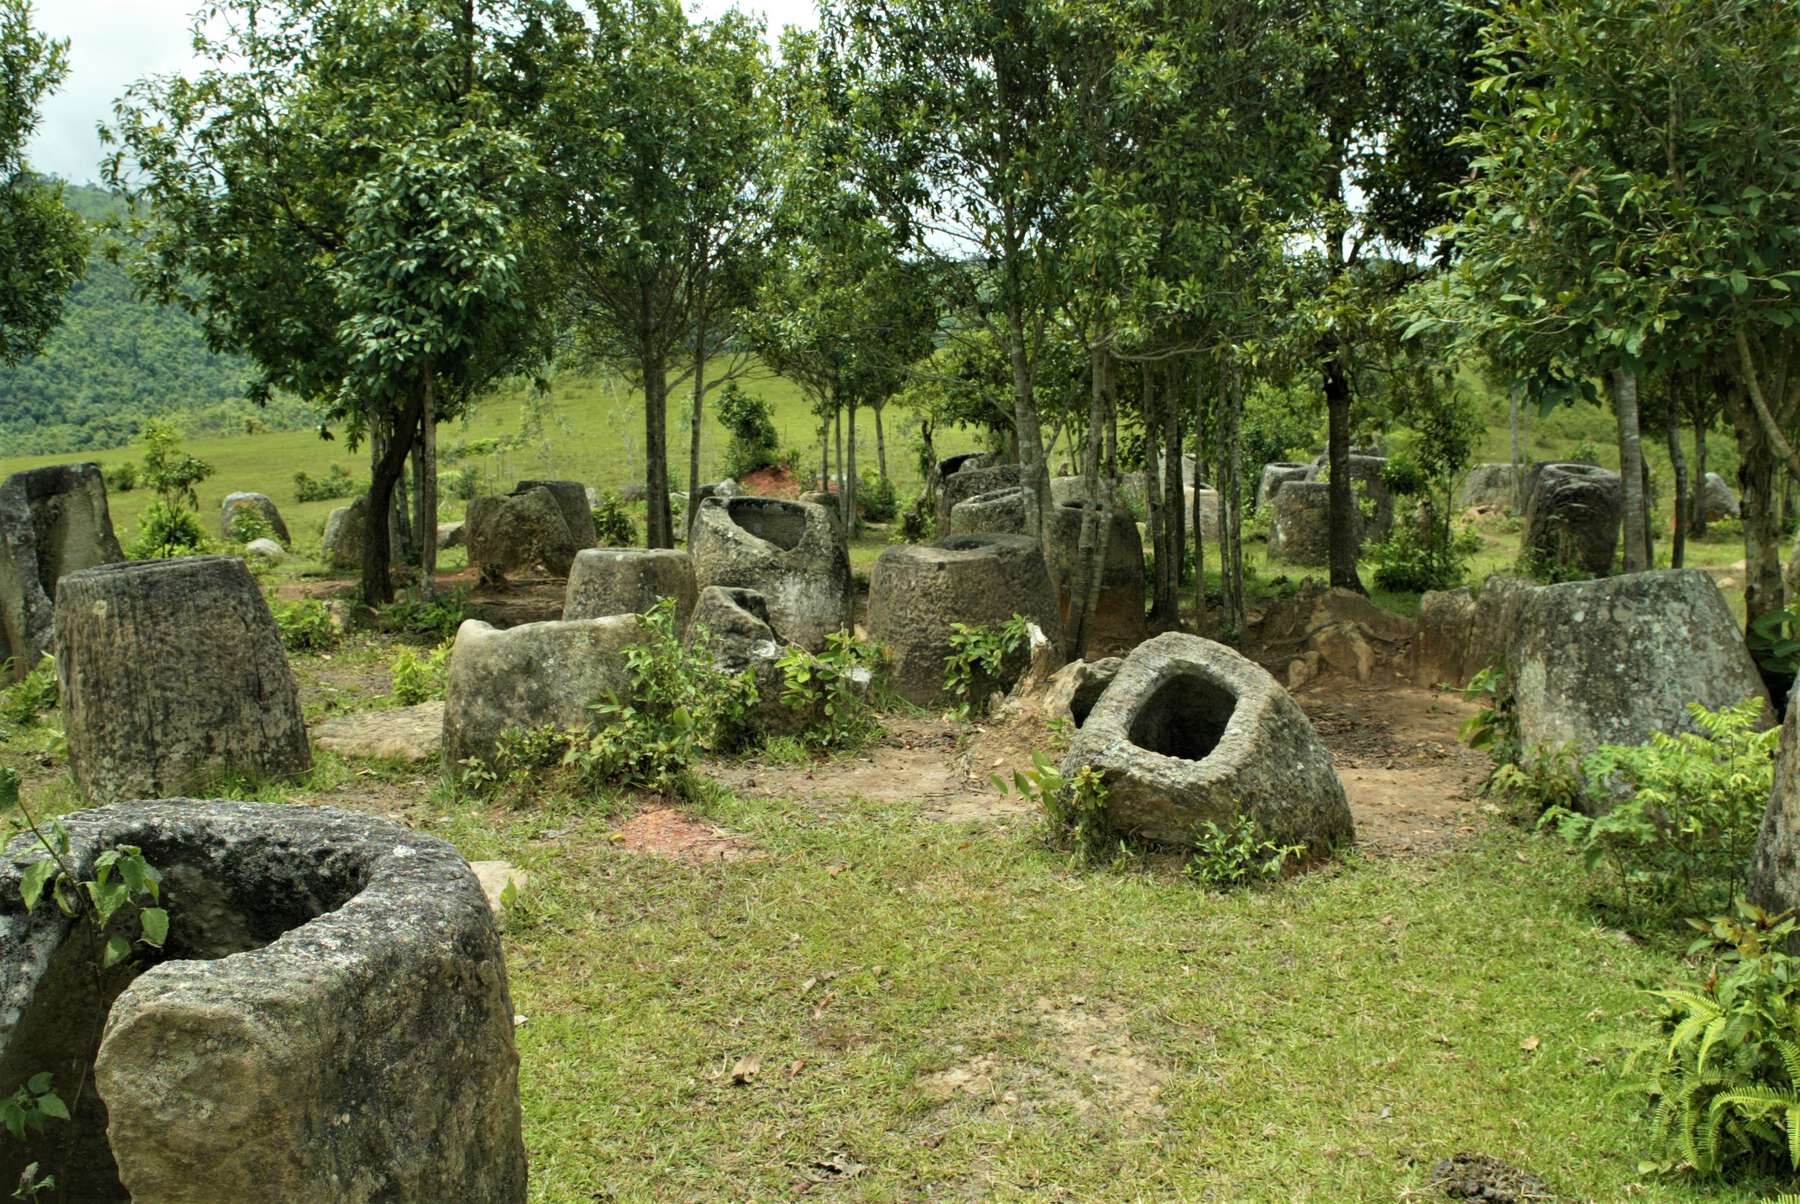 Spread out are large, cylindrical stones with holes on top that overrun by the nature.